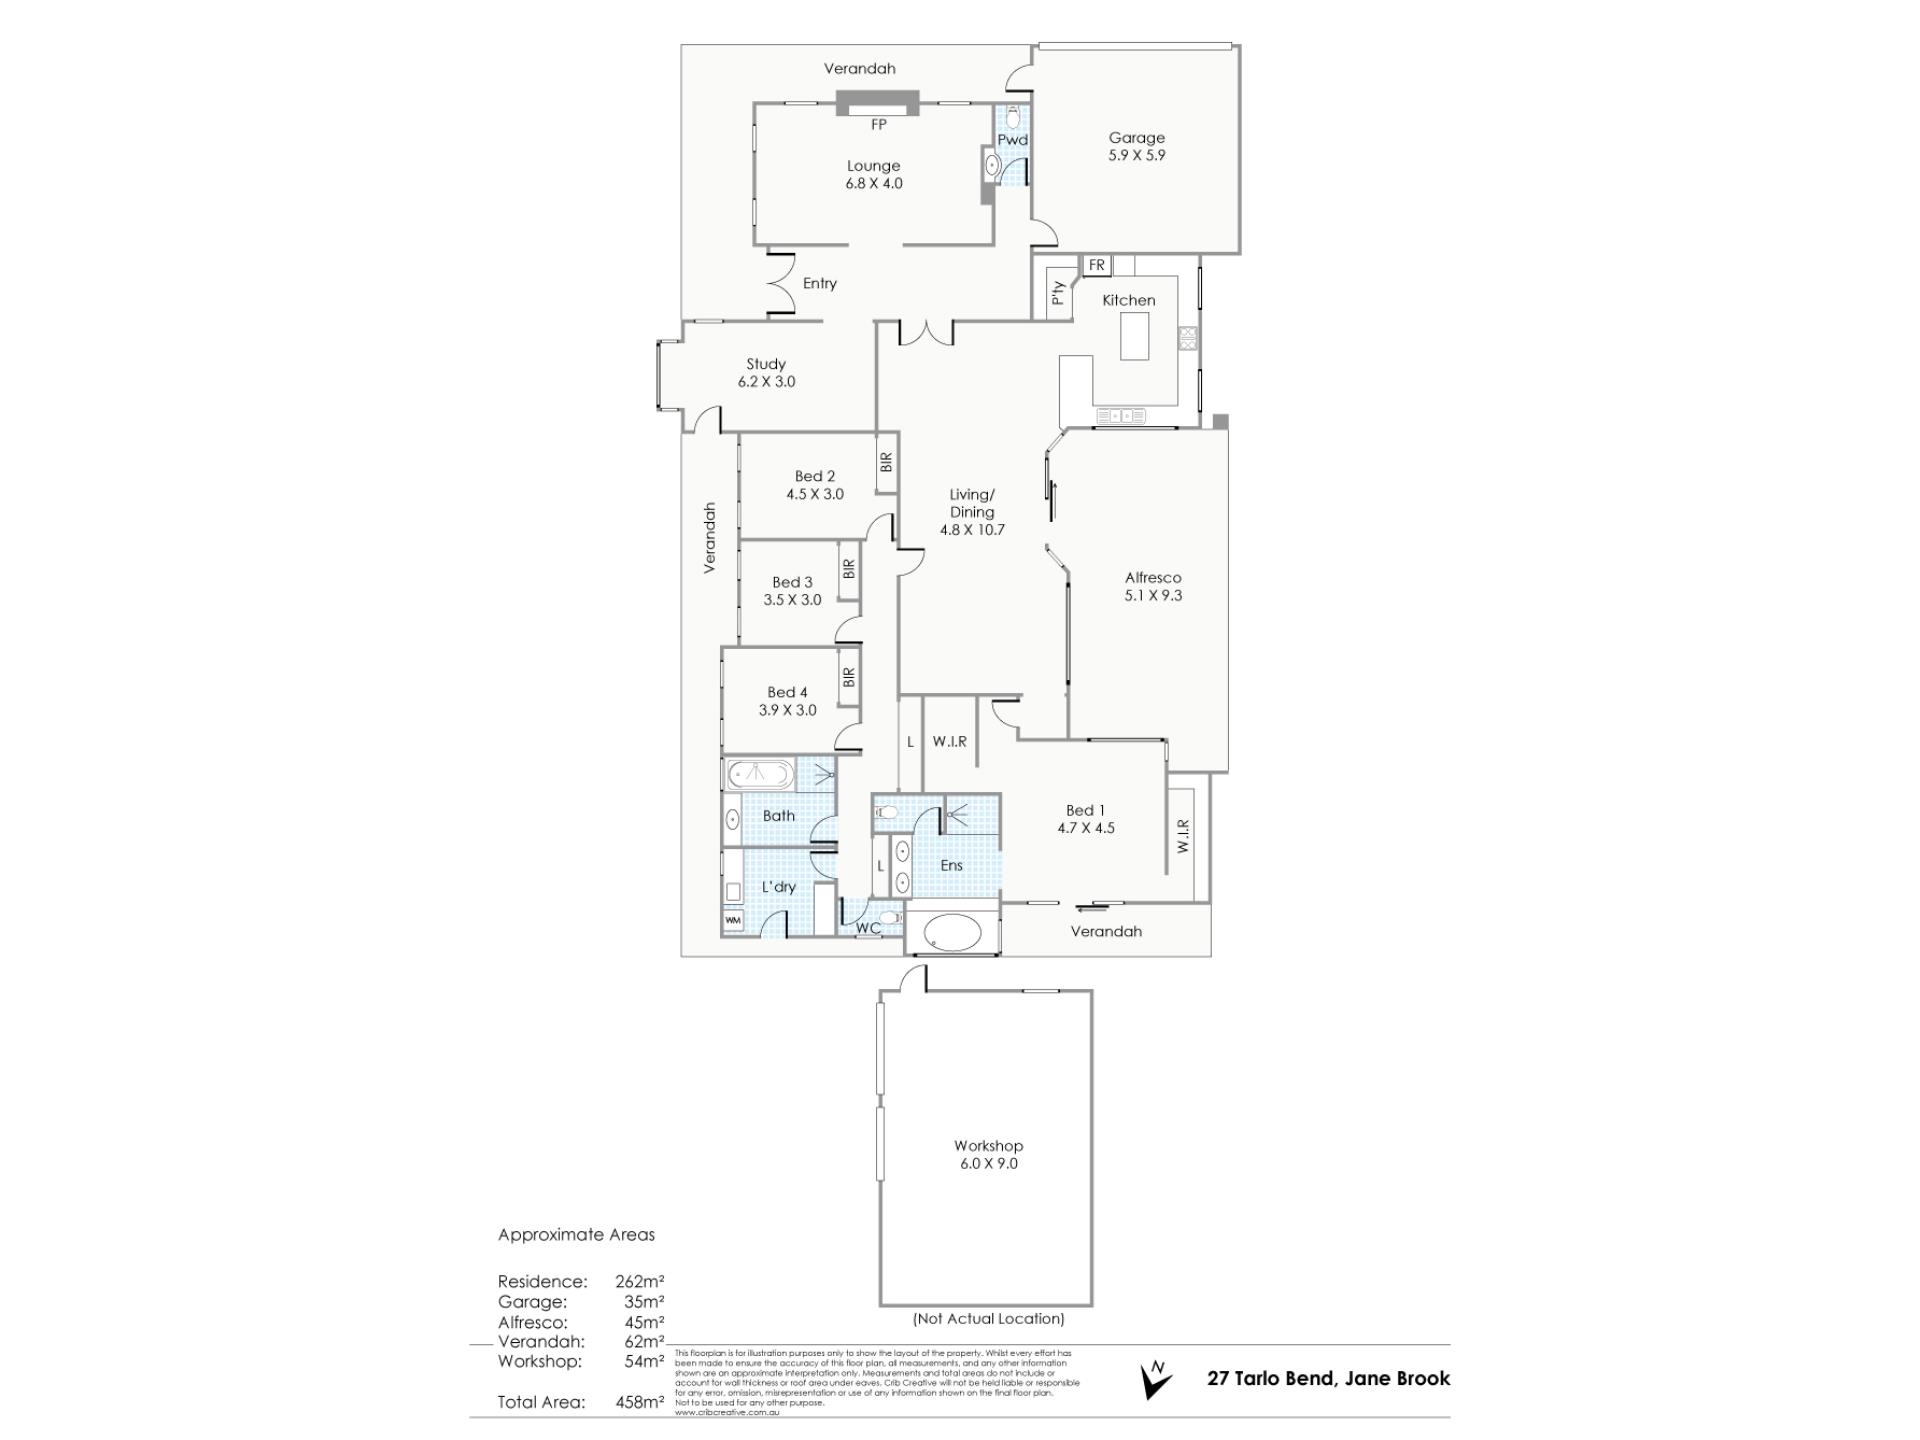 Property for sale in Jane Brook : Earnshaws Real Estate